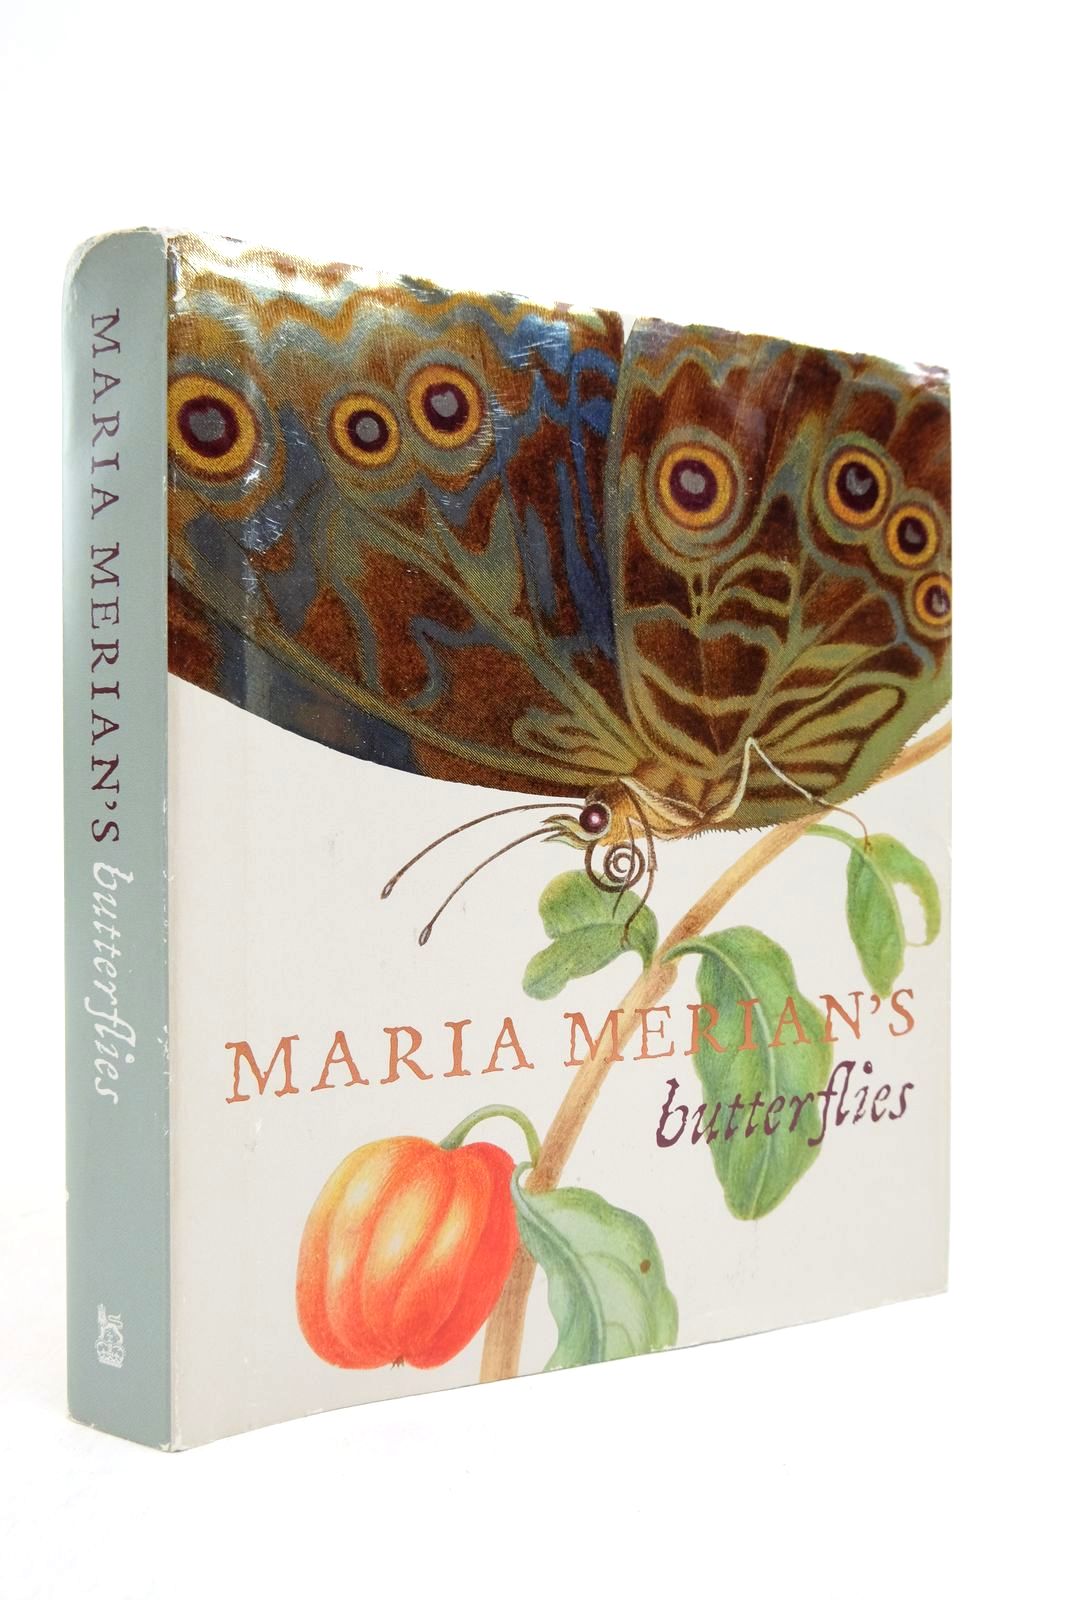 Photo of MARIA MERIAN'S BUTTERFLIES written by Heard, Kate published by Royal Collection Trust (STOCK CODE: 2139650)  for sale by Stella & Rose's Books